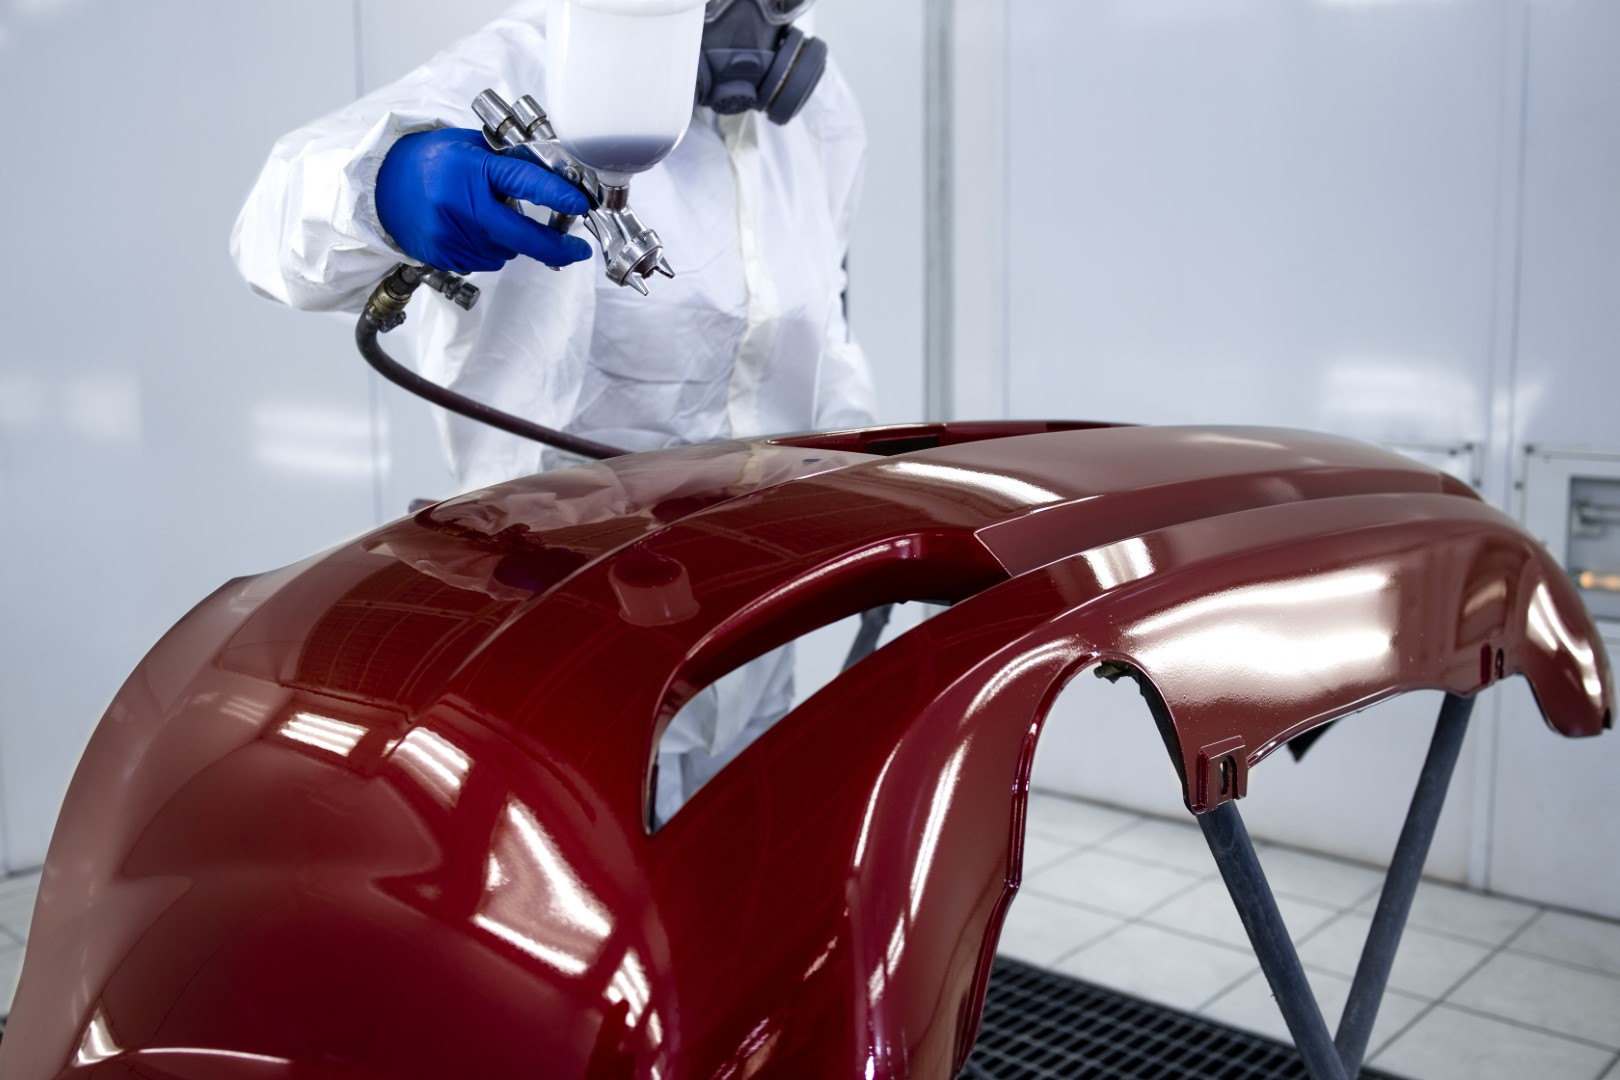 Car painter in protective clothes and mask painting automobile bumper with metallic paint and varnish in chamber workshop.